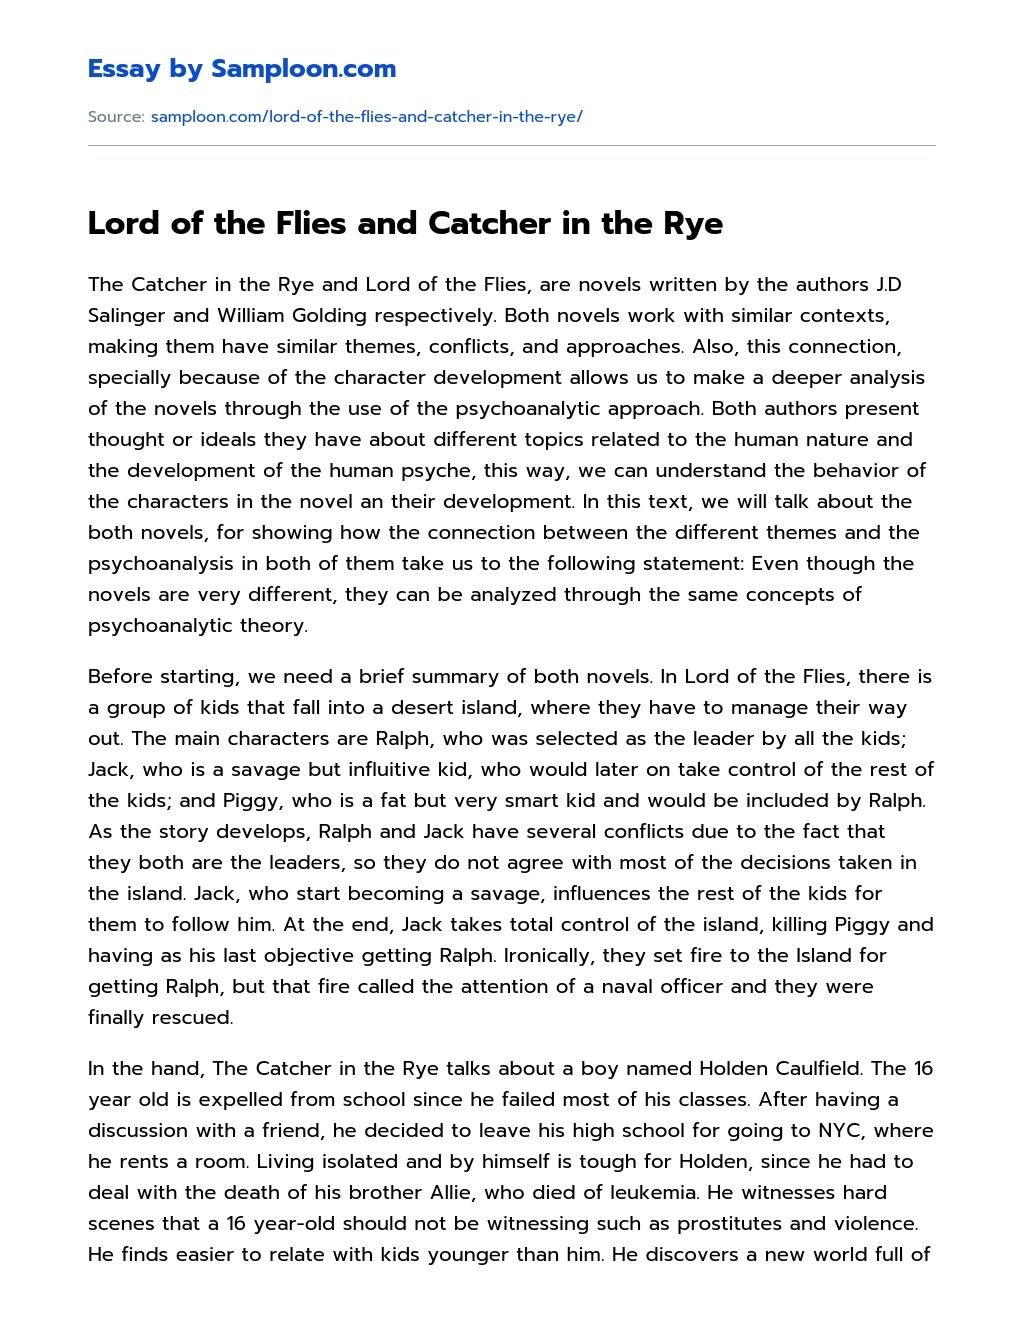 Lord of the Flies and Catcher in the Rye Character Analysis essay